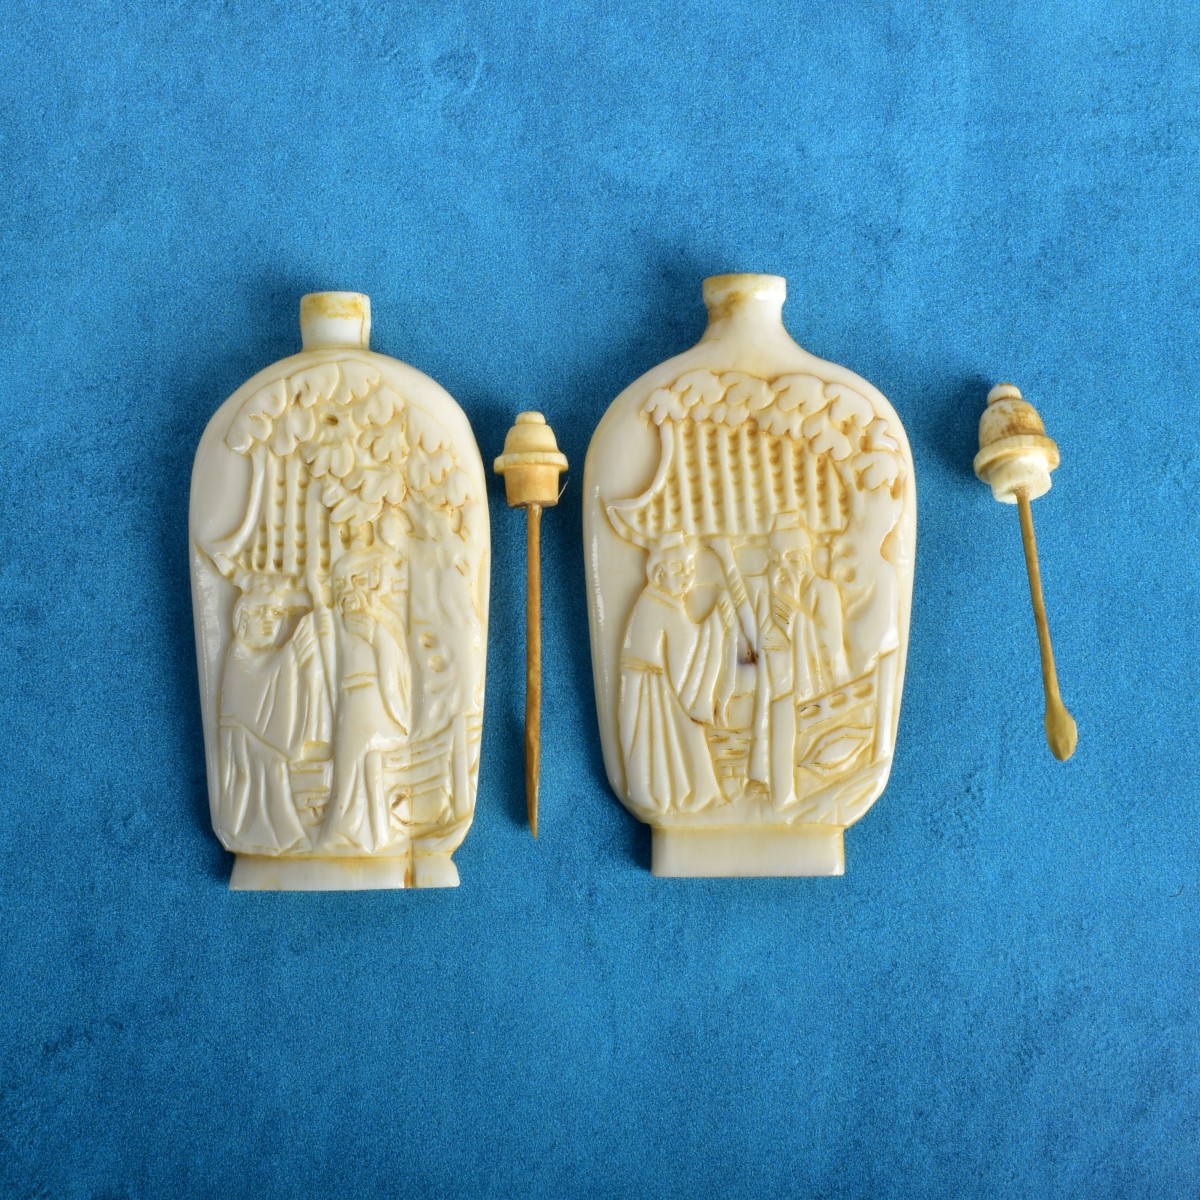 Two Antique Chinese Snuff Bottles